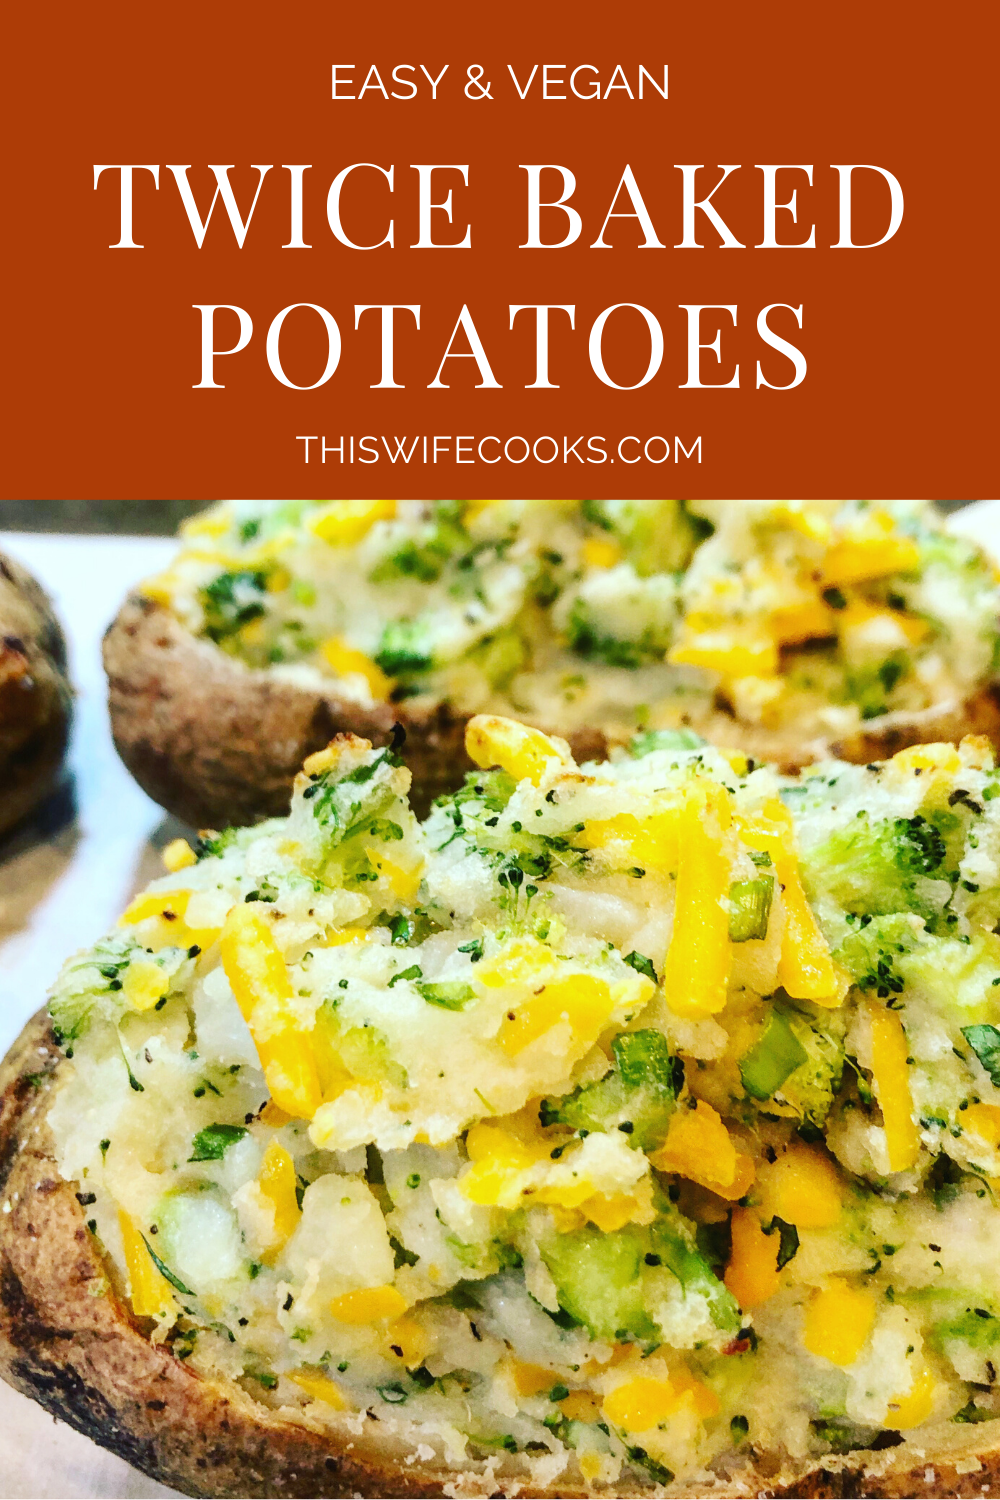 Vegan Twice Baked Potatoes - 
A simple and savory, crowd-pleasing comfort food classic! Easy to make and knocks the socks off plain baked potatoes any day! via @thiswifecooks